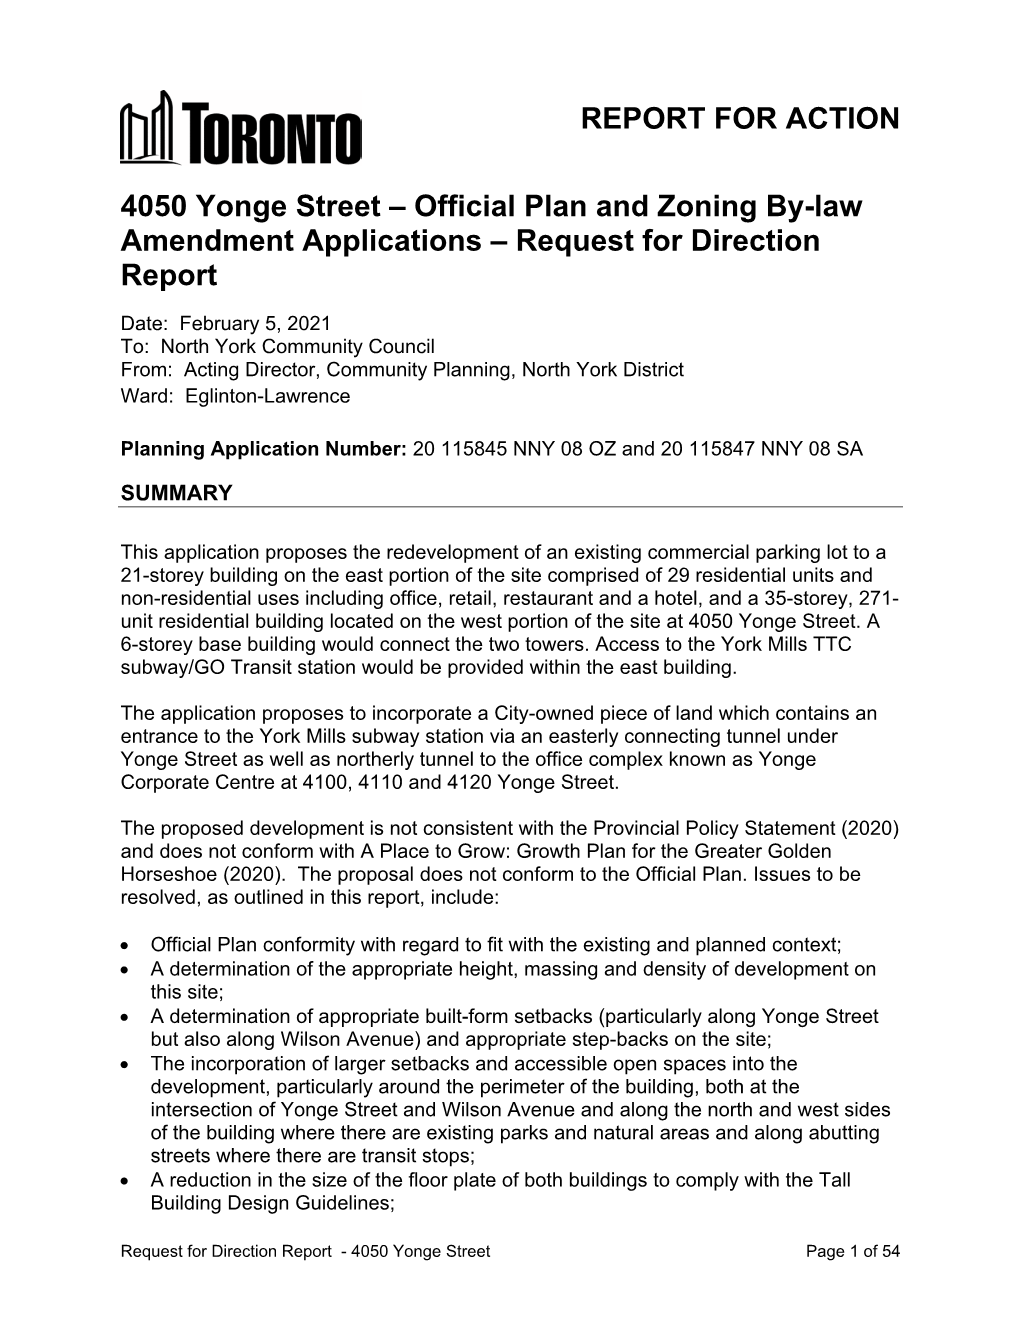 4050 Yonge Street – Official Plan and Zoning By-Law Amendment Applications – Request for Direction Report